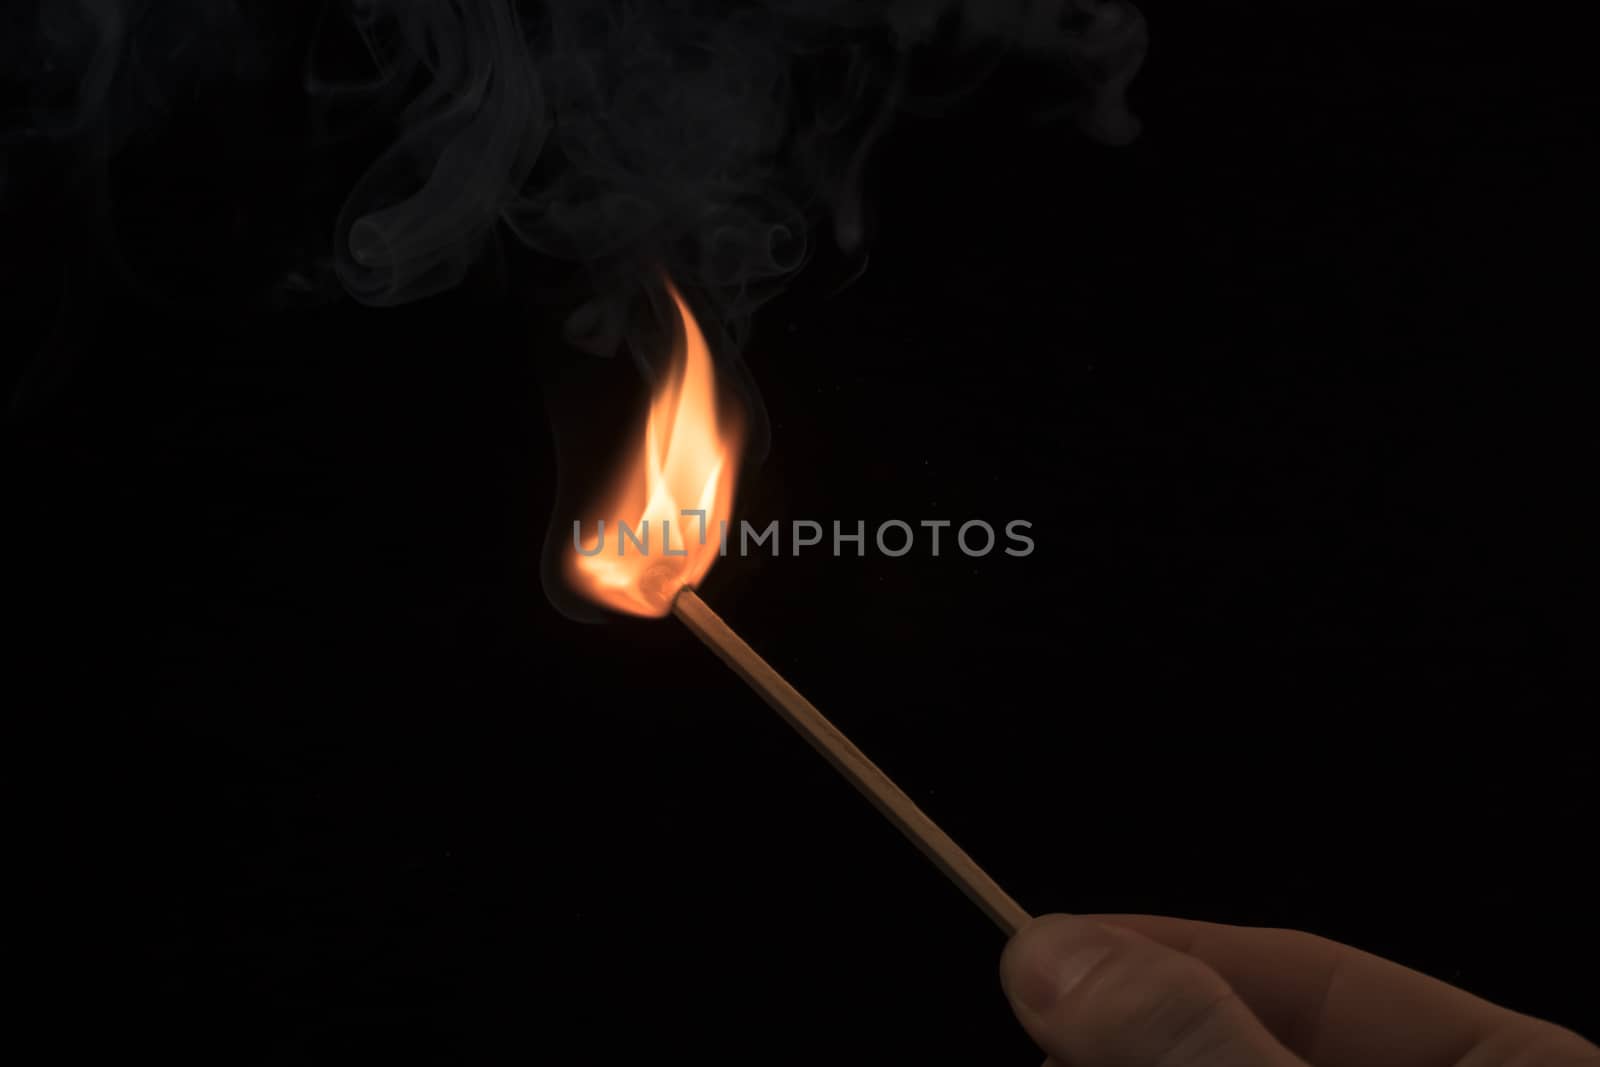 Hand holding a lighted match with fire flame and smoke on a blac by YevgeniySam